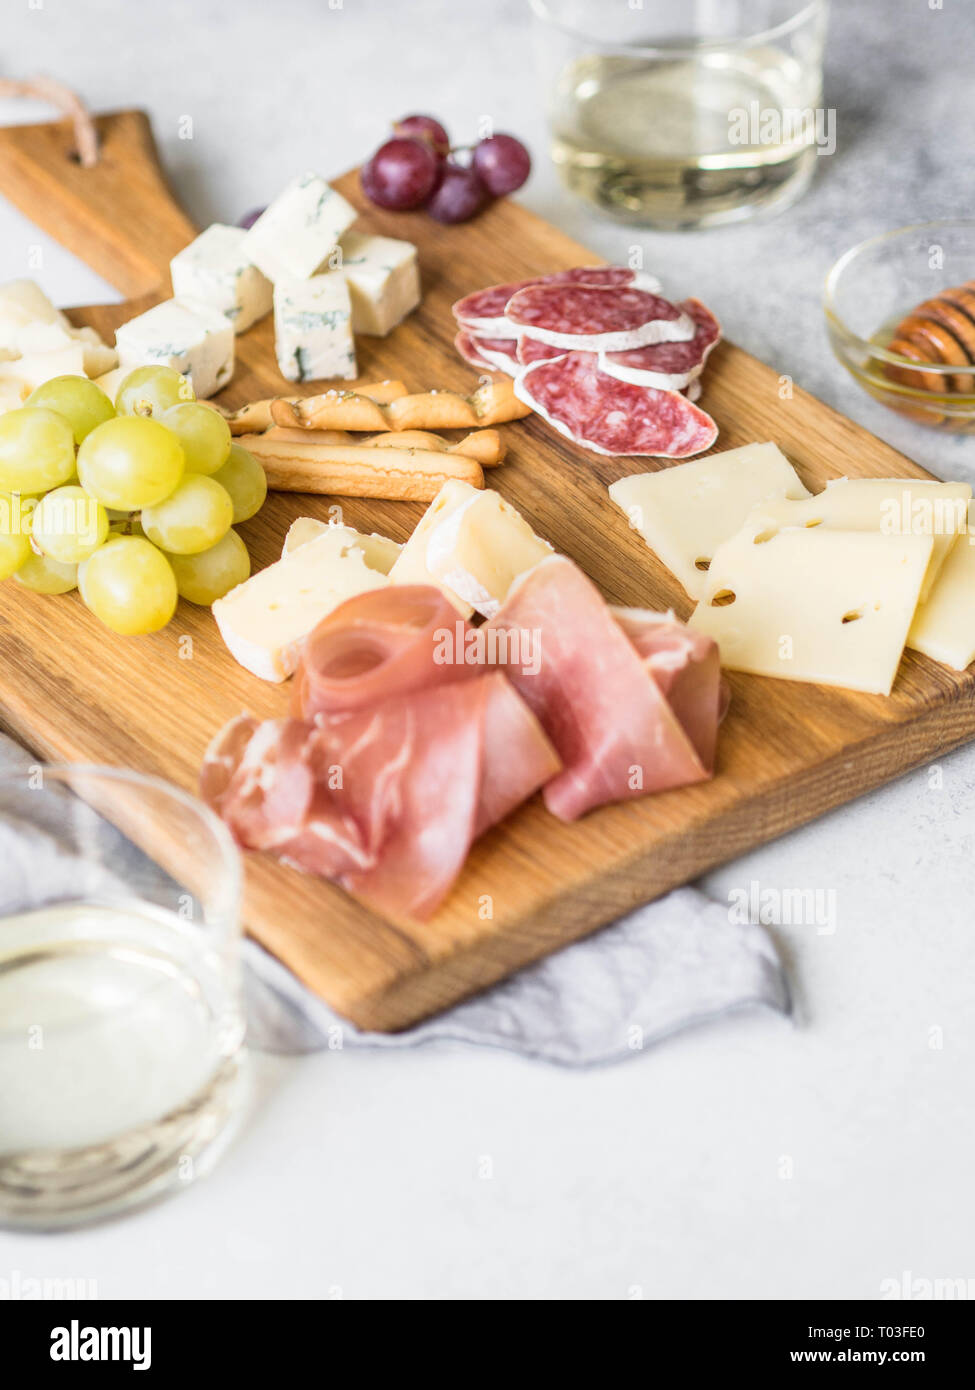 Cheese and meat wine snack set on wood board . Variety of cheese, salami, prosciutto, bread sticks, honey, grapes and two glasses with wine. Stock Photo